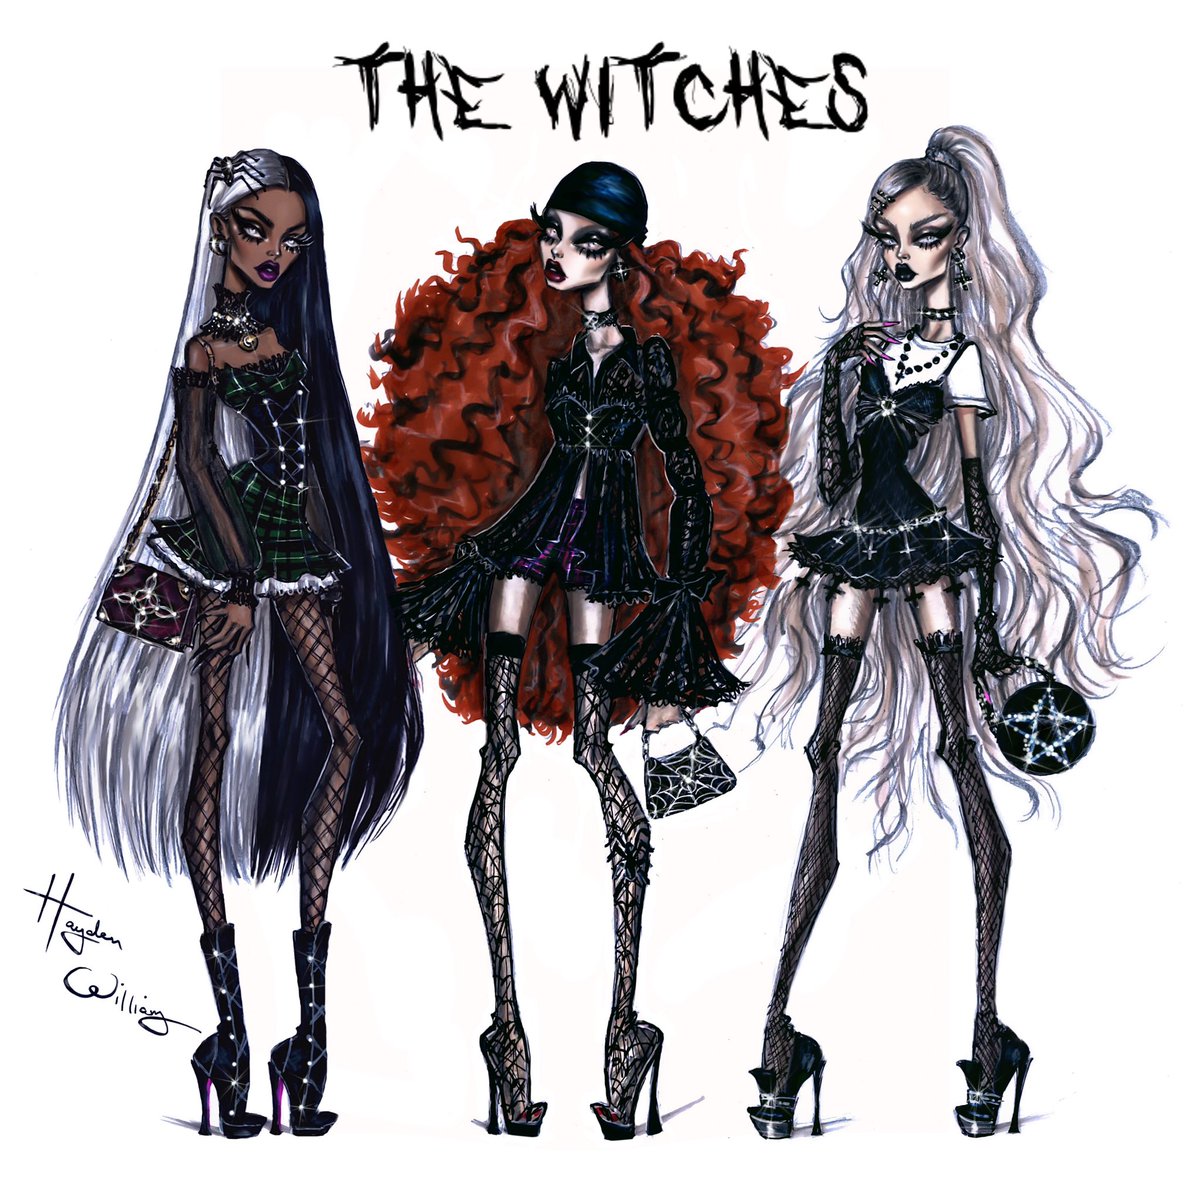 I know!!! I wanted to do a new version of them, but had been so busy working on multiple different projects (some that aren’t announced yet) and then working on celebrity Halloween designs too etc. Hopefully next year though. I love doing #TheWitches 🖤